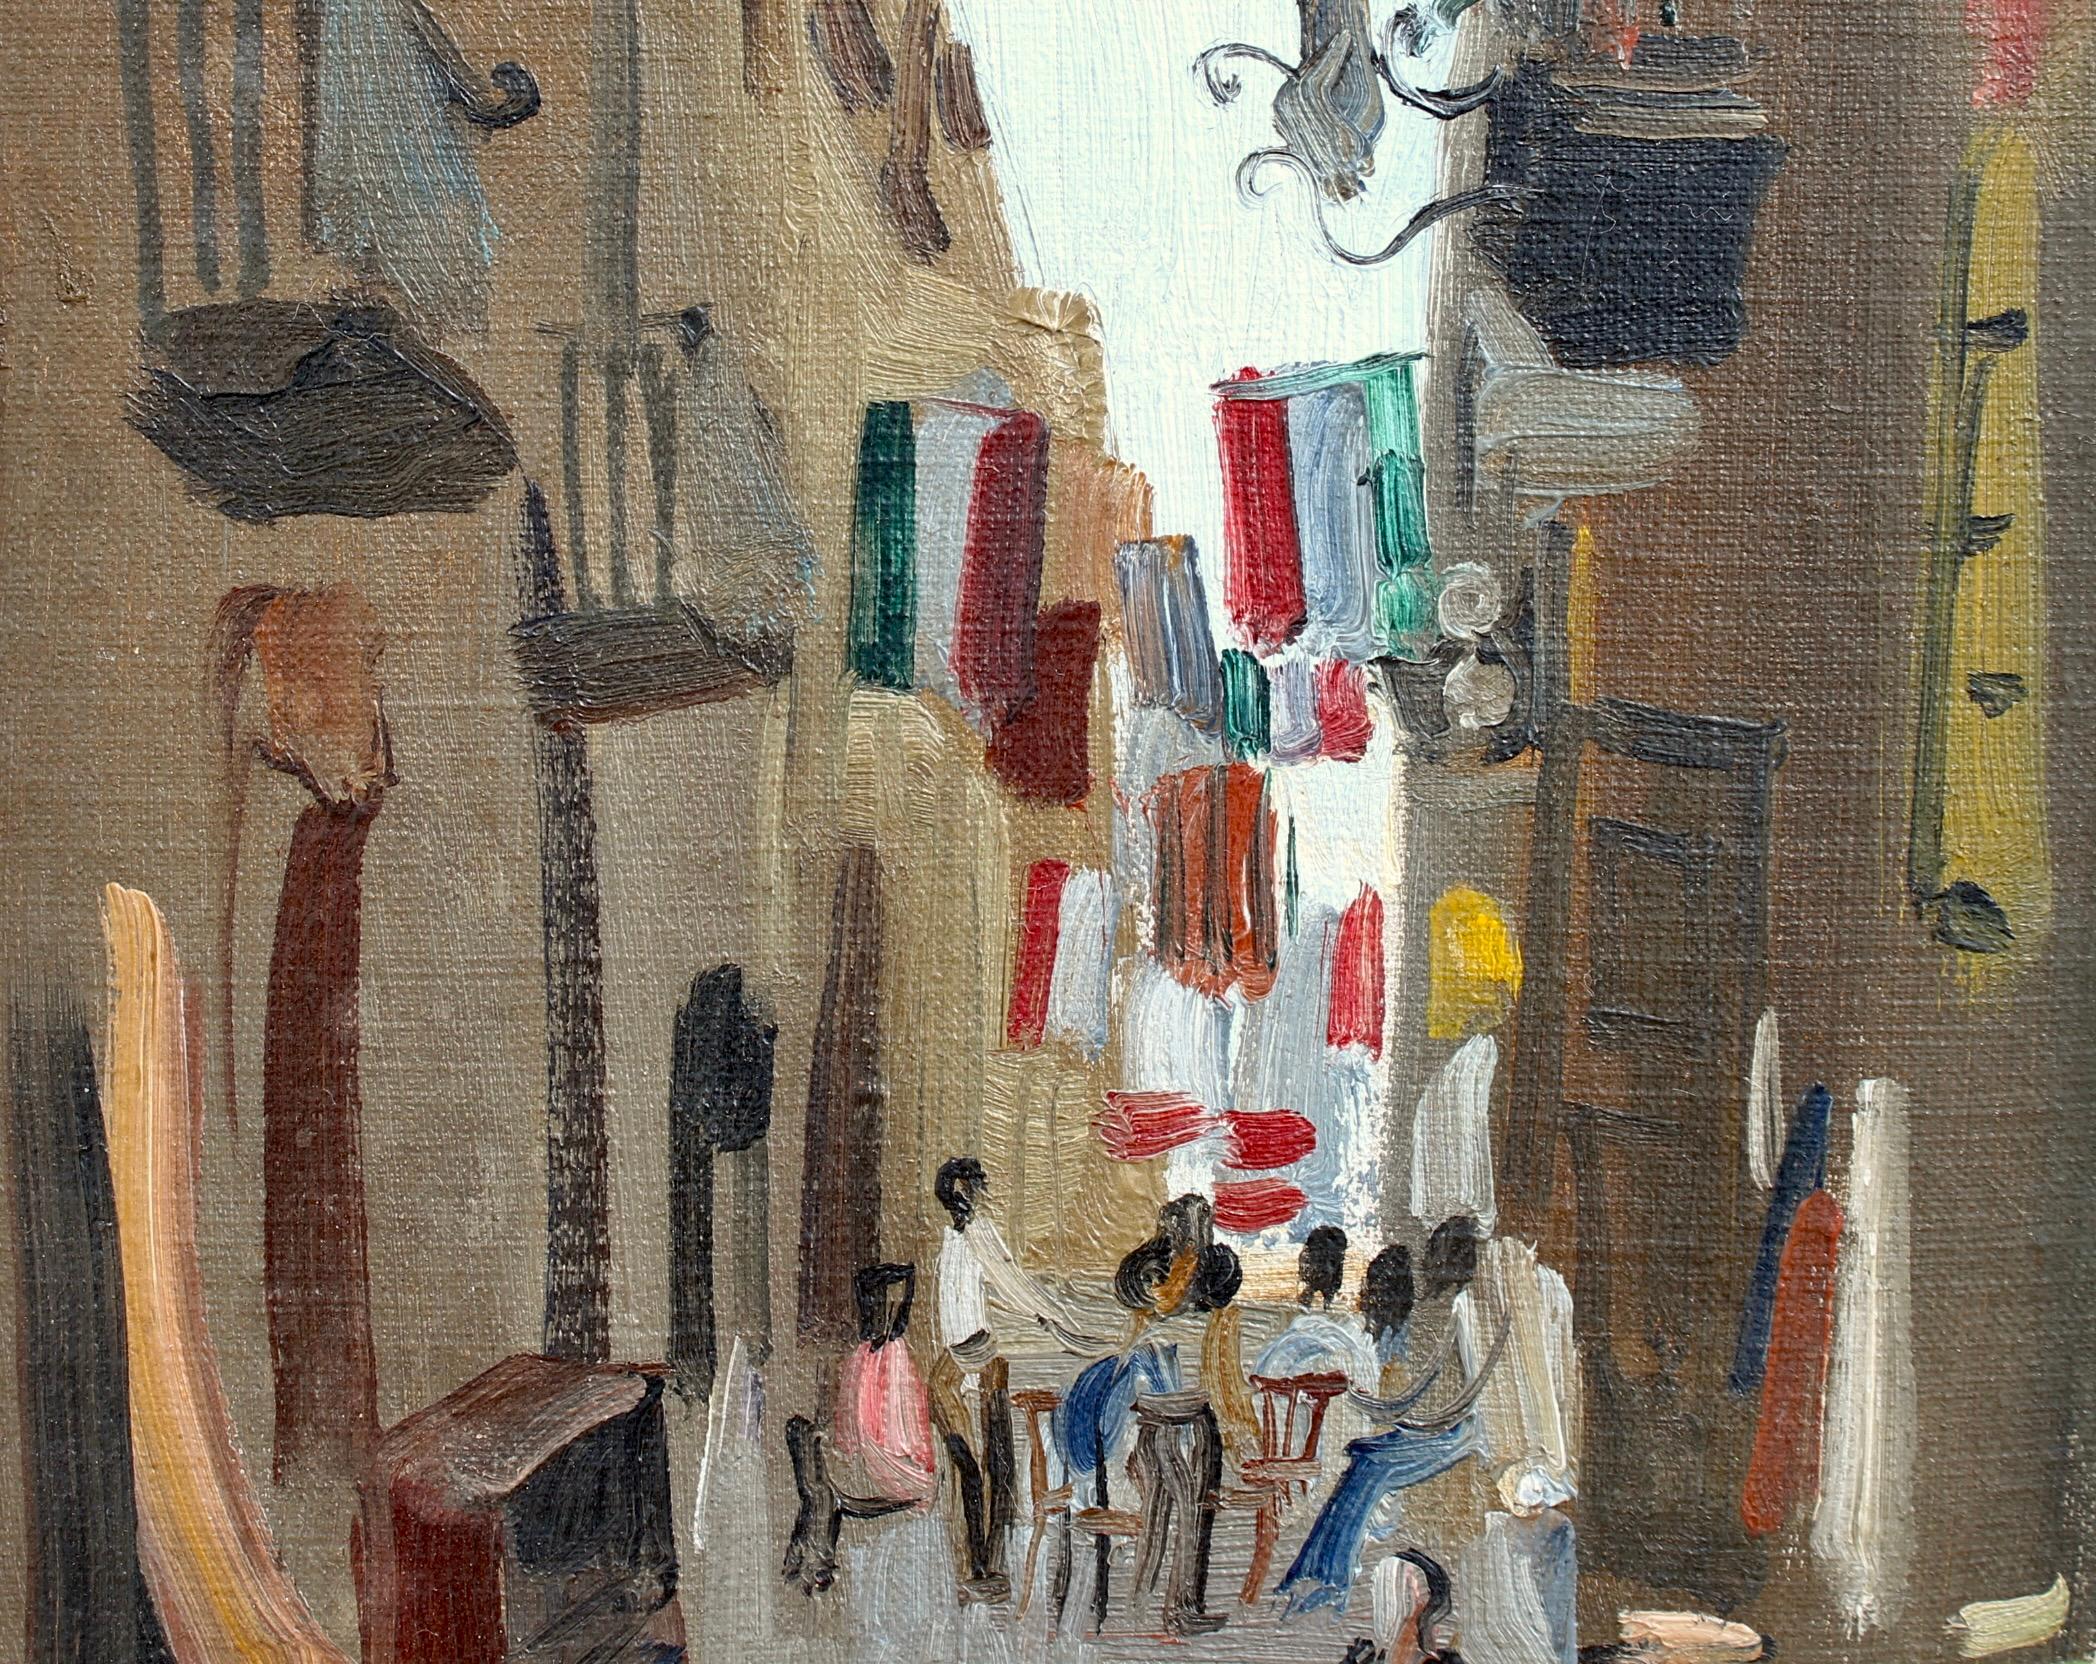 'Street View of Naples, Italy' oil on board, by Claude Petitet (circa 1950s). Naples is a major national and international tourist destination, being one of Italy and Europe's top tourist cities. Blessed with breathtaking geography, the view of the